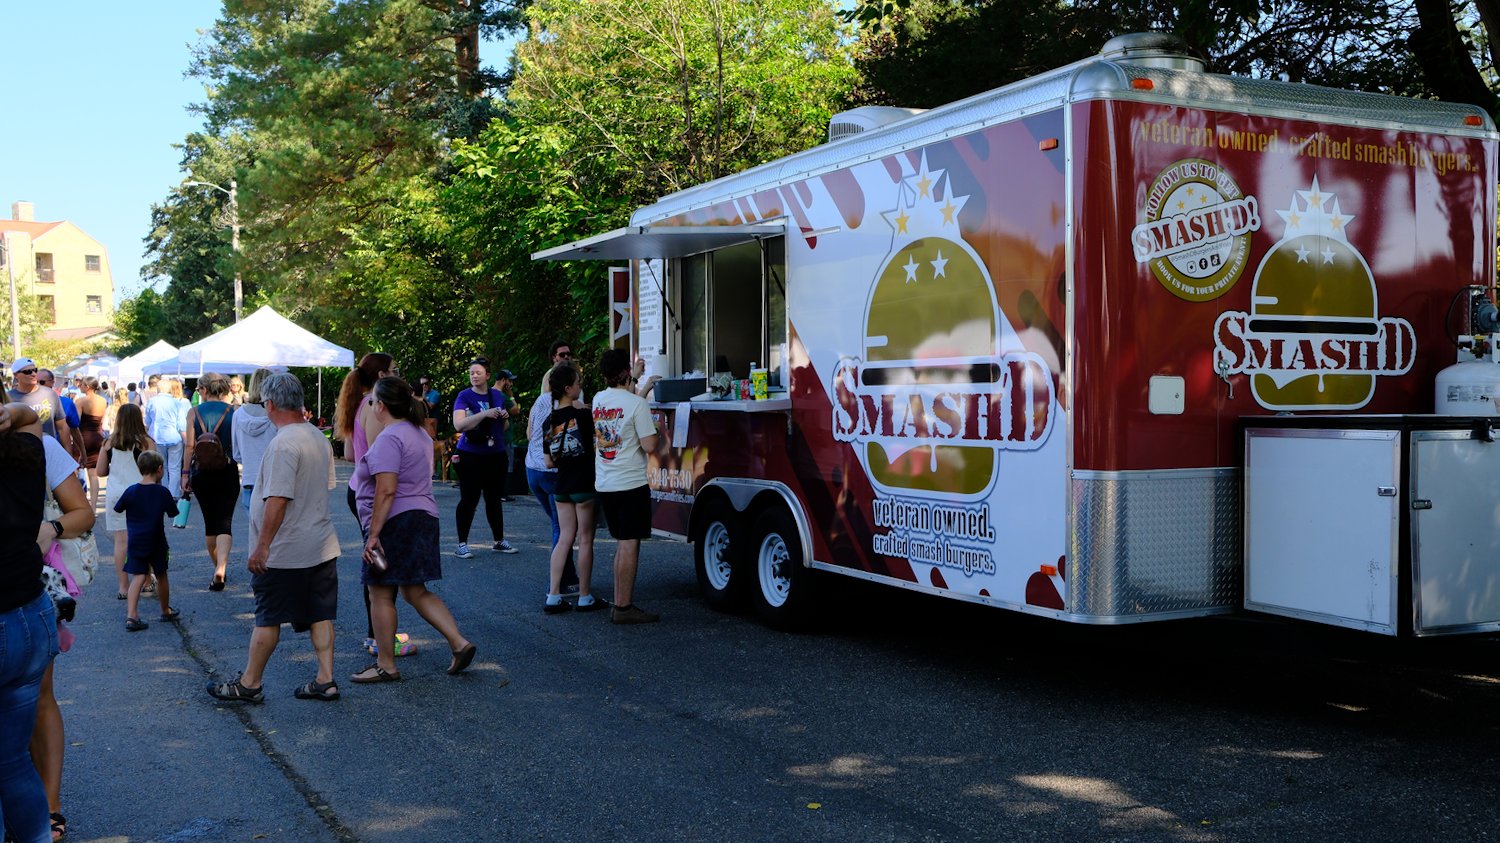 Smash'D food truck at the farmers market.